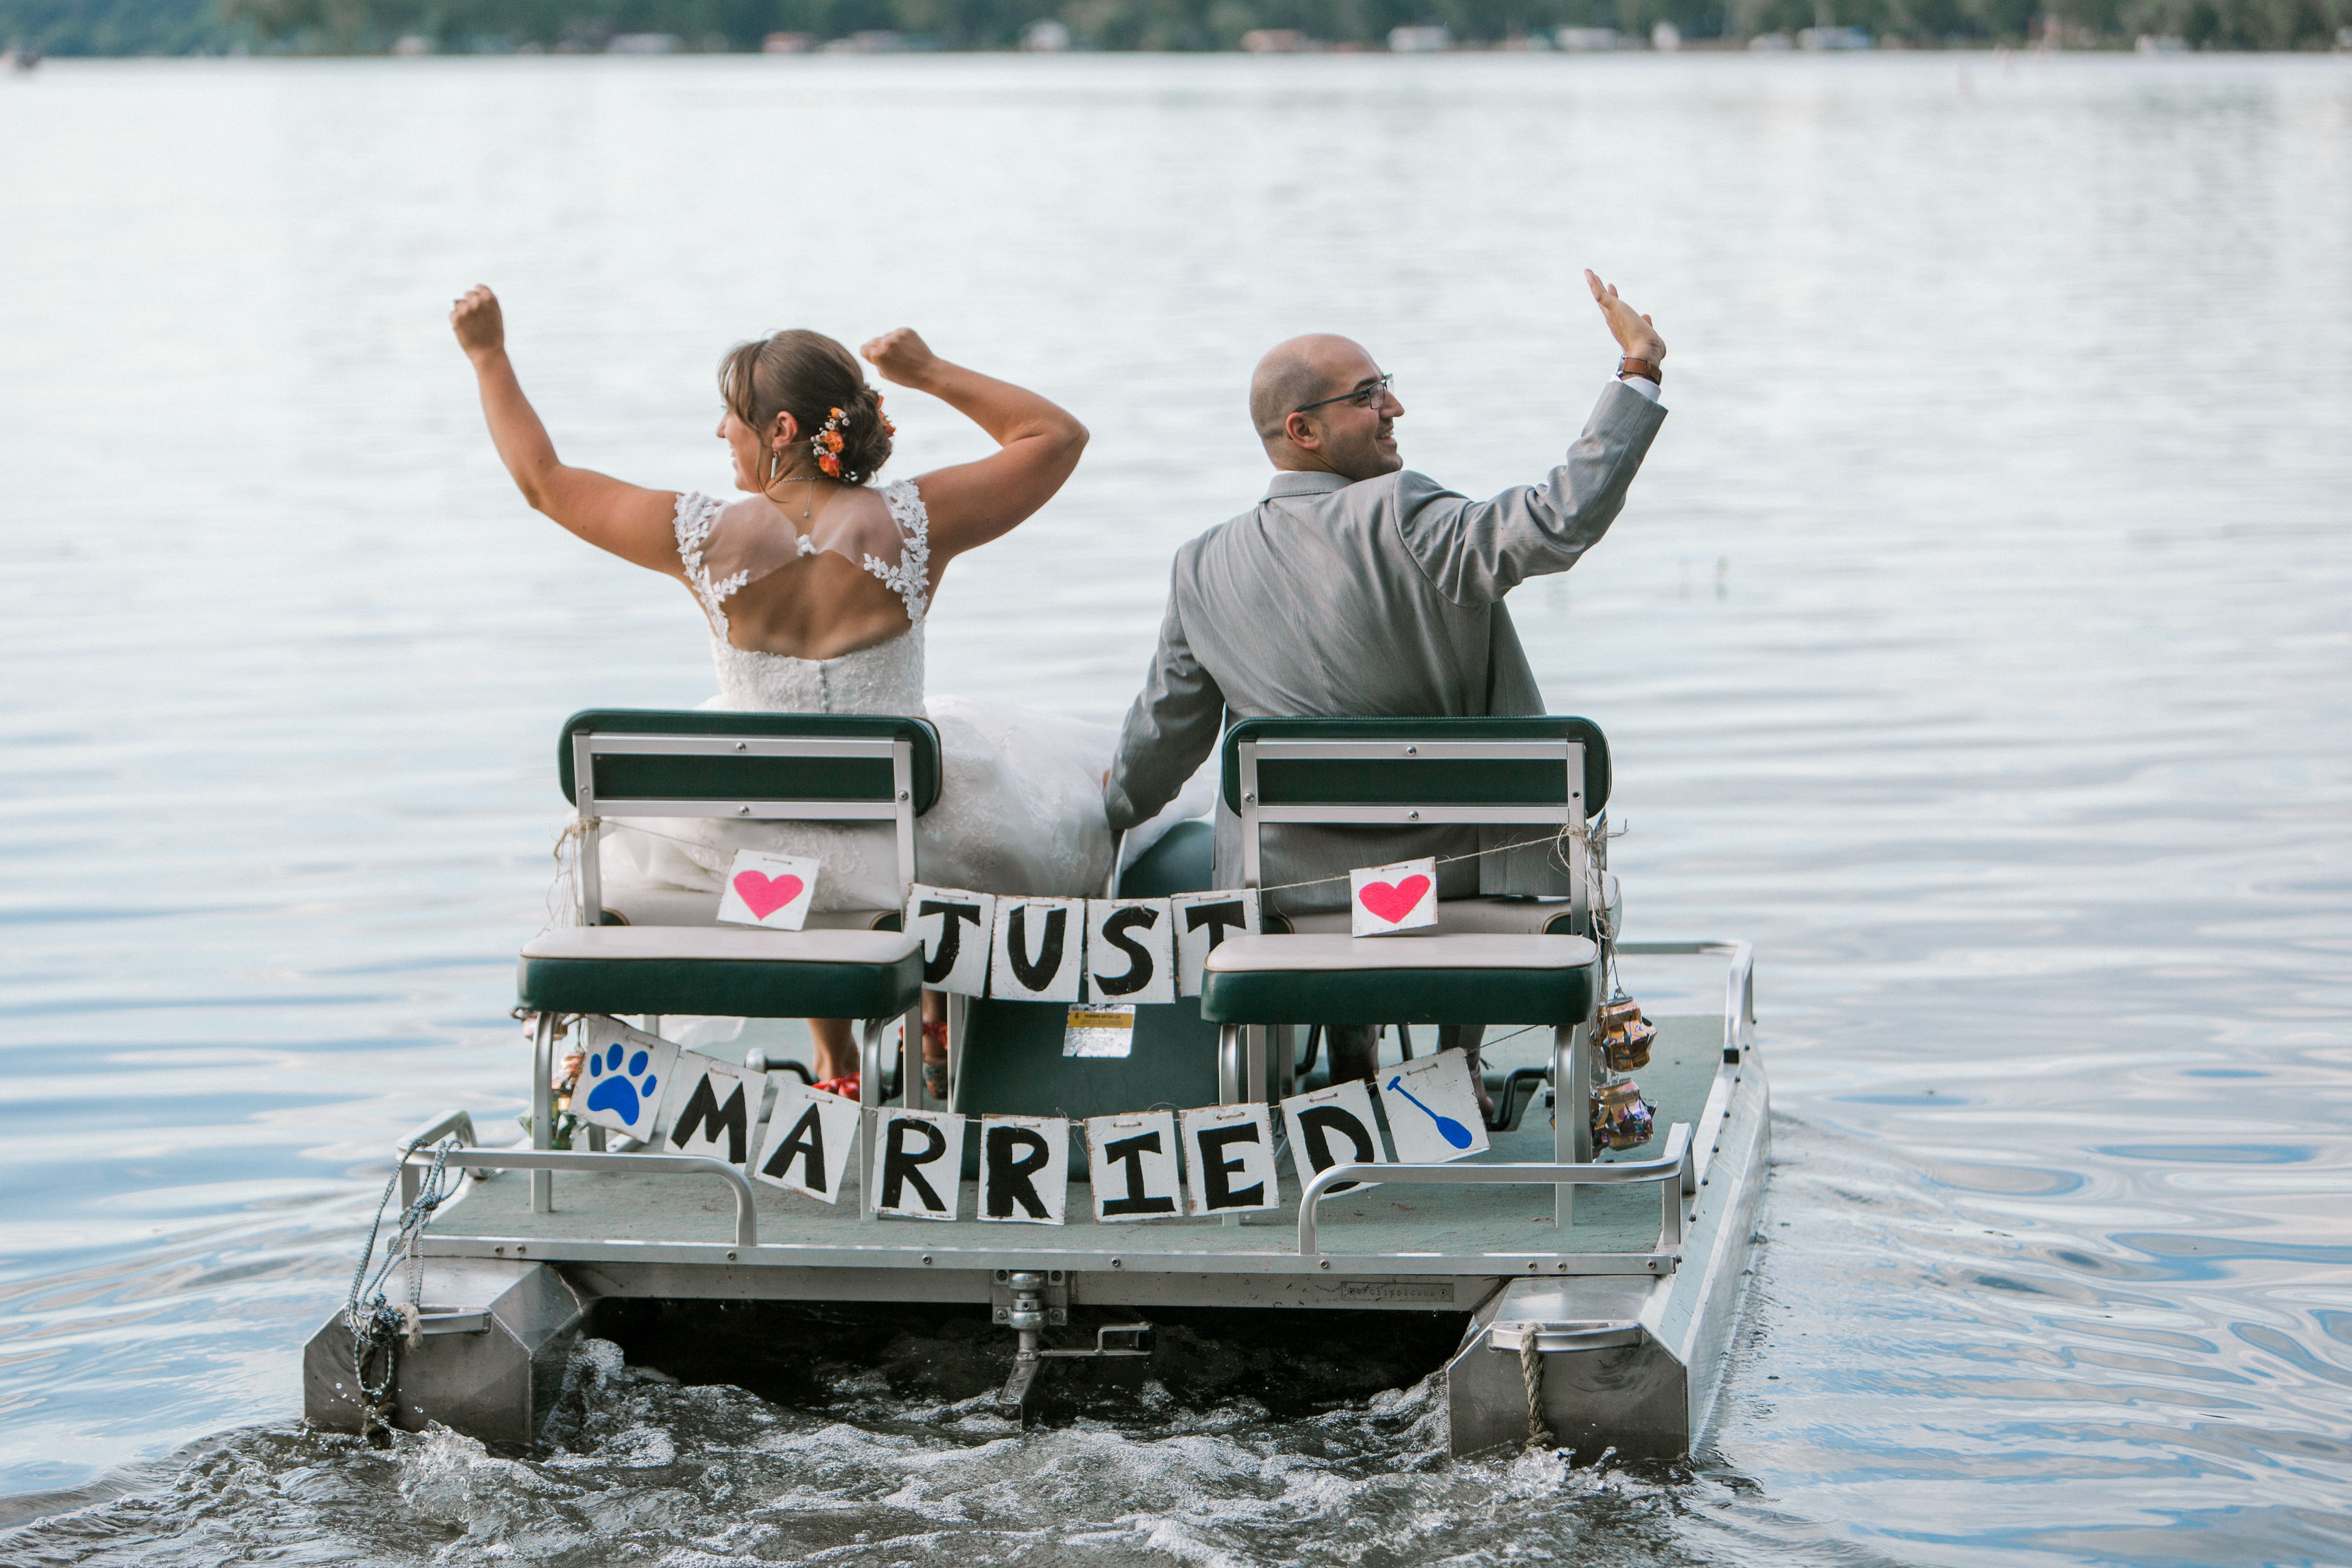 Bride and groom riding paddle boat with just married sign